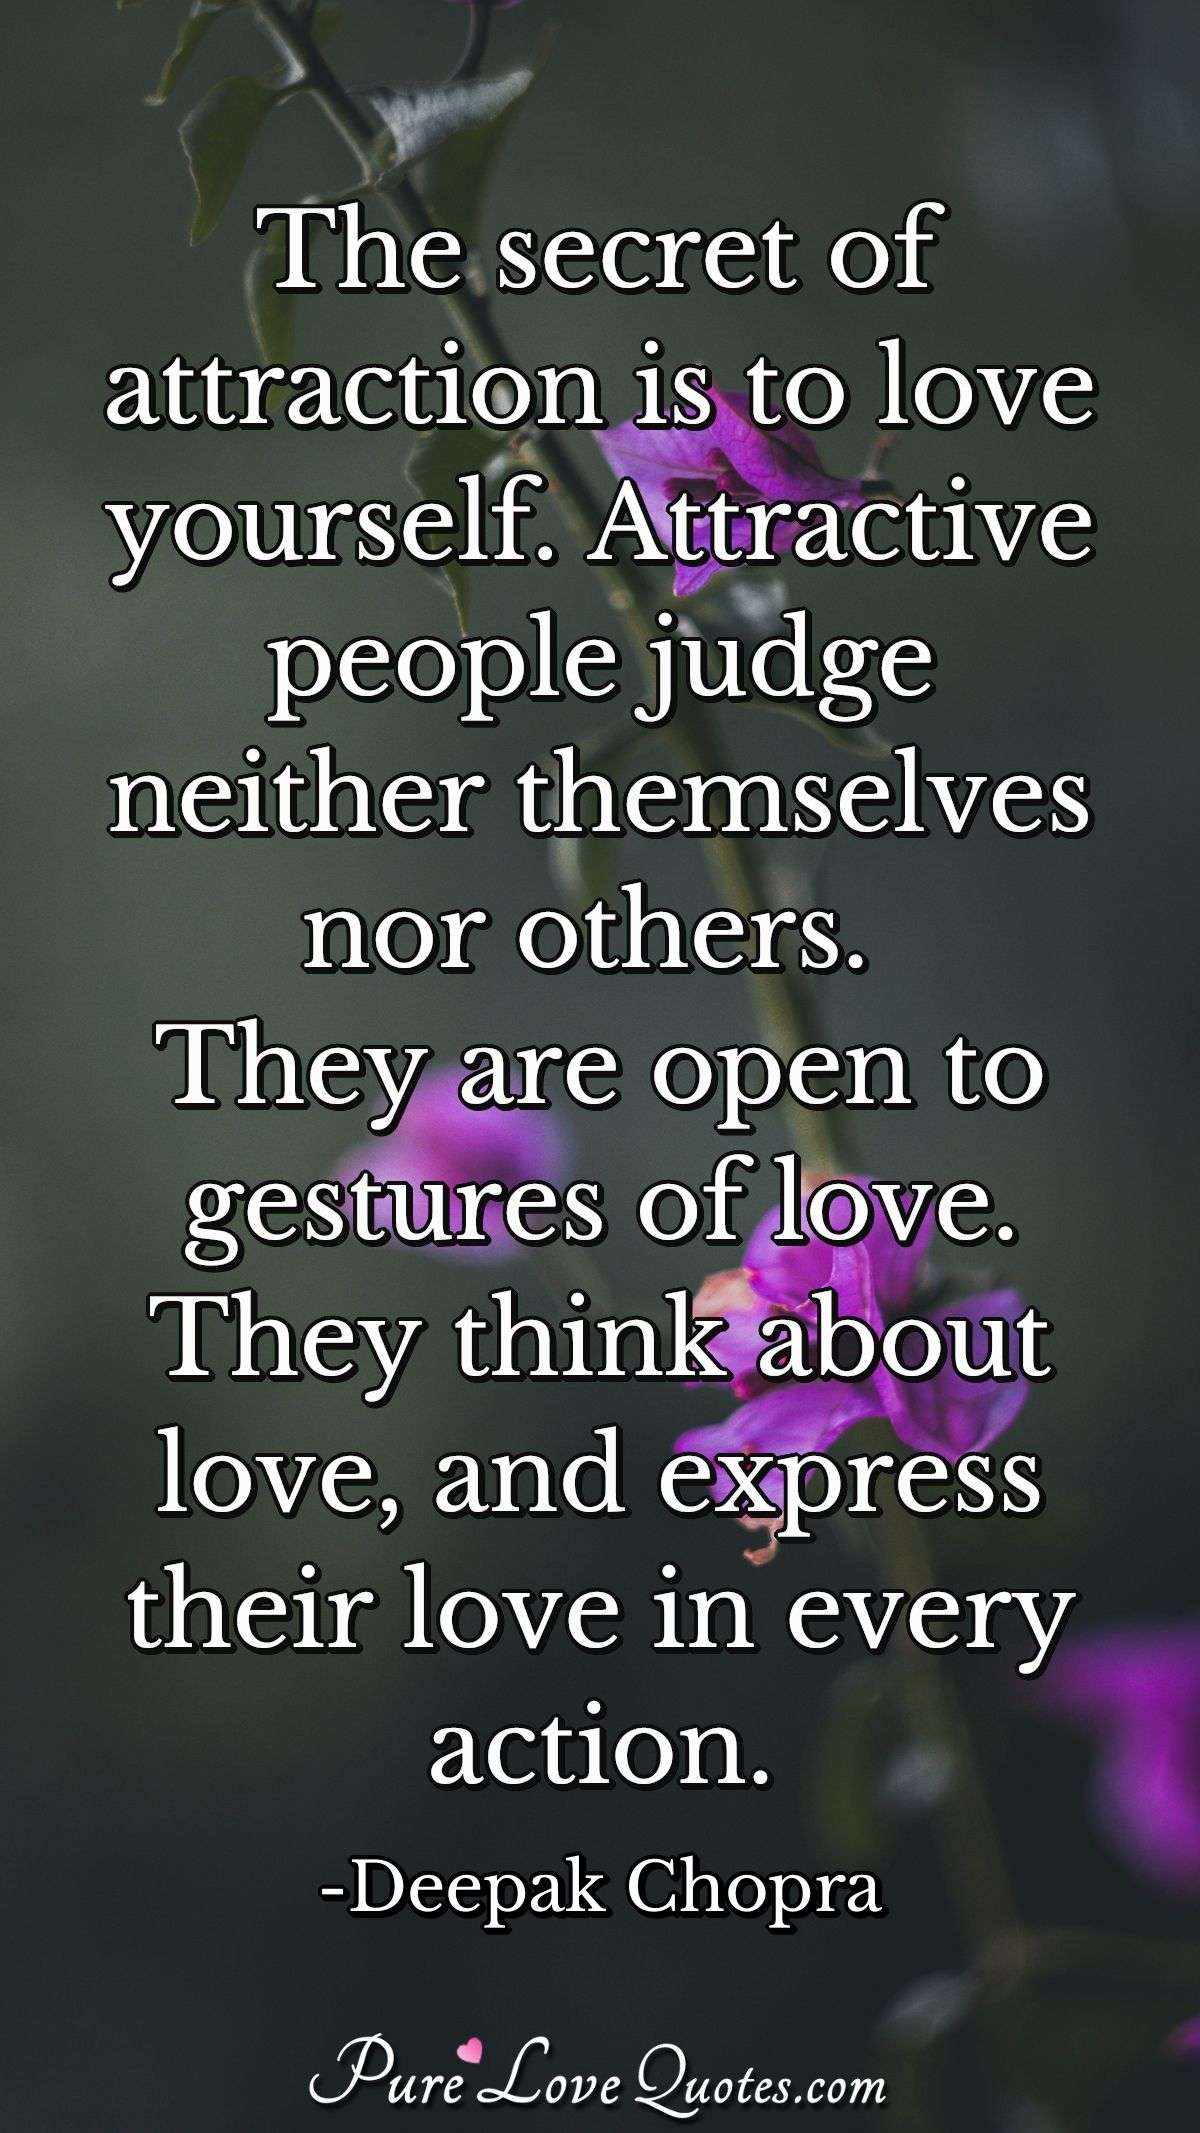 The secret of attraction is to love yourself. Attractive people judge neither themselves nor others. They are open to gestures of love. They think about love, and express their love in every action. - Deepak Chopra